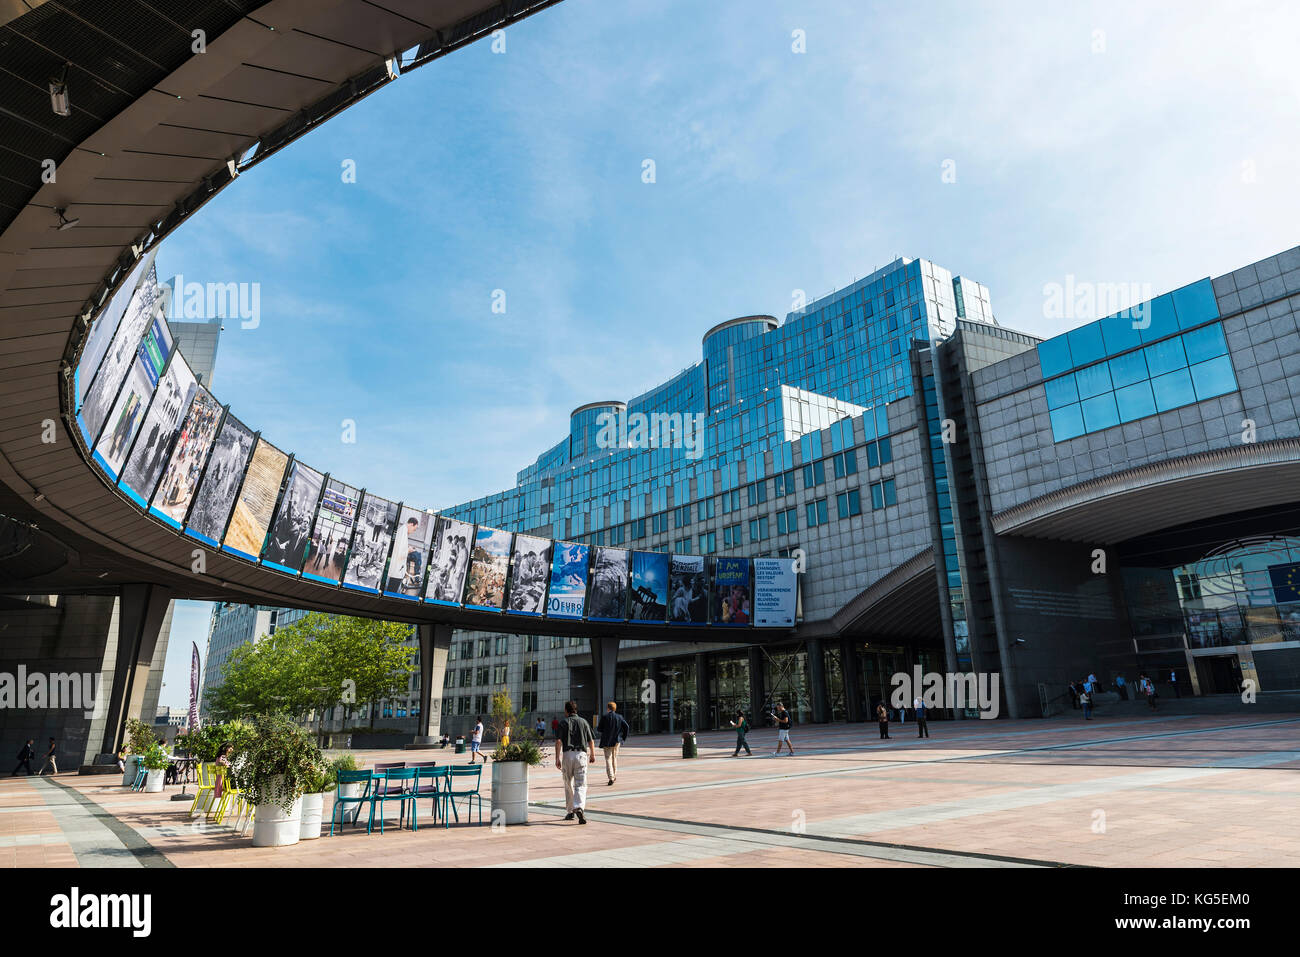 Brussels, Belgium - August 28, 2017: Facade of the modern office buildings of the European Parliament and station Europe with people around in Brussel Stock Photo